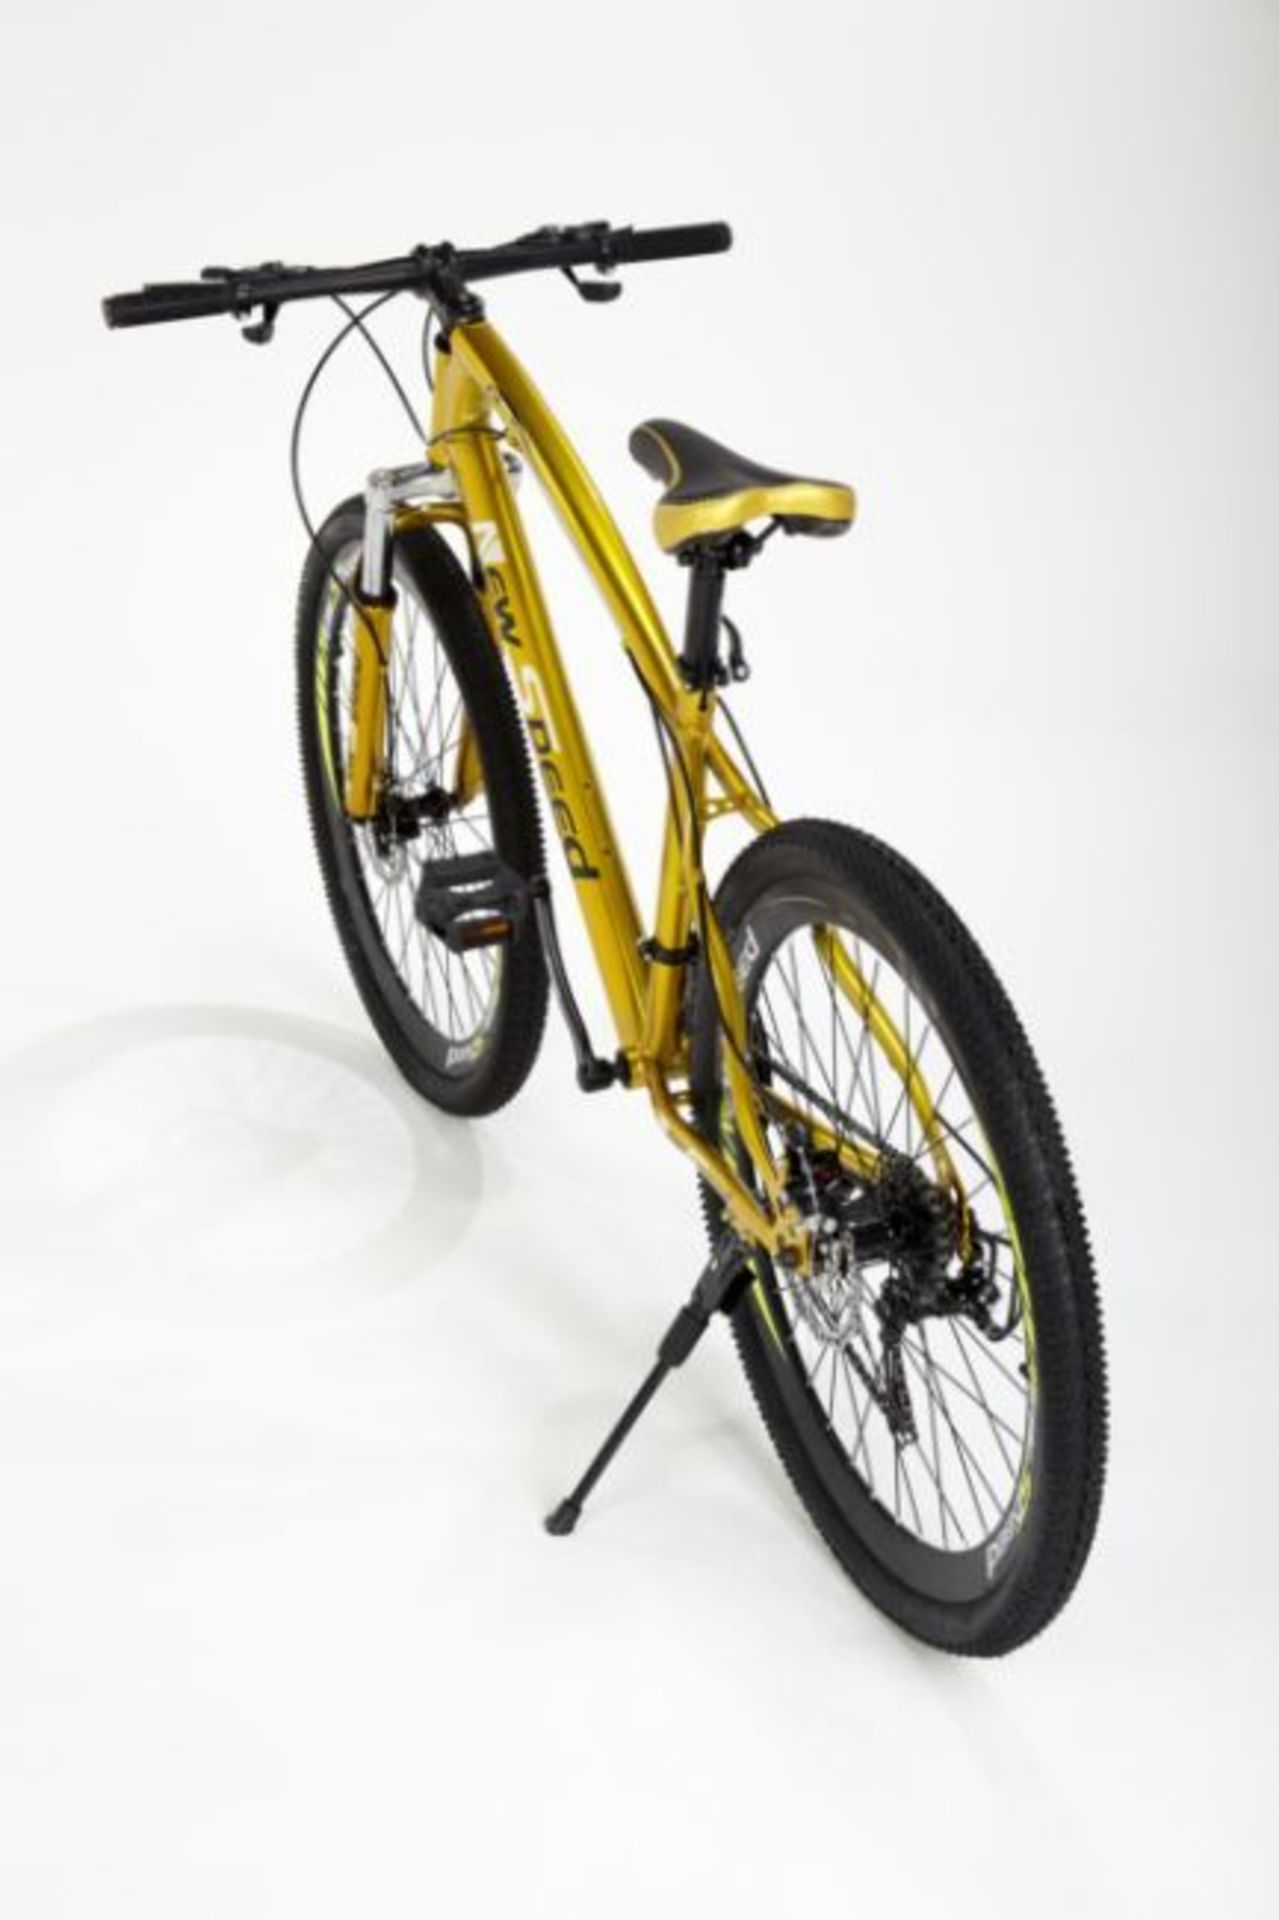 JOB LOT 5 X BRAND NEW NEW SPEED 21 GEARS STUNNING SUSPENSION GOLD COLOURED MOUNTAIN BIKE - Image 4 of 11